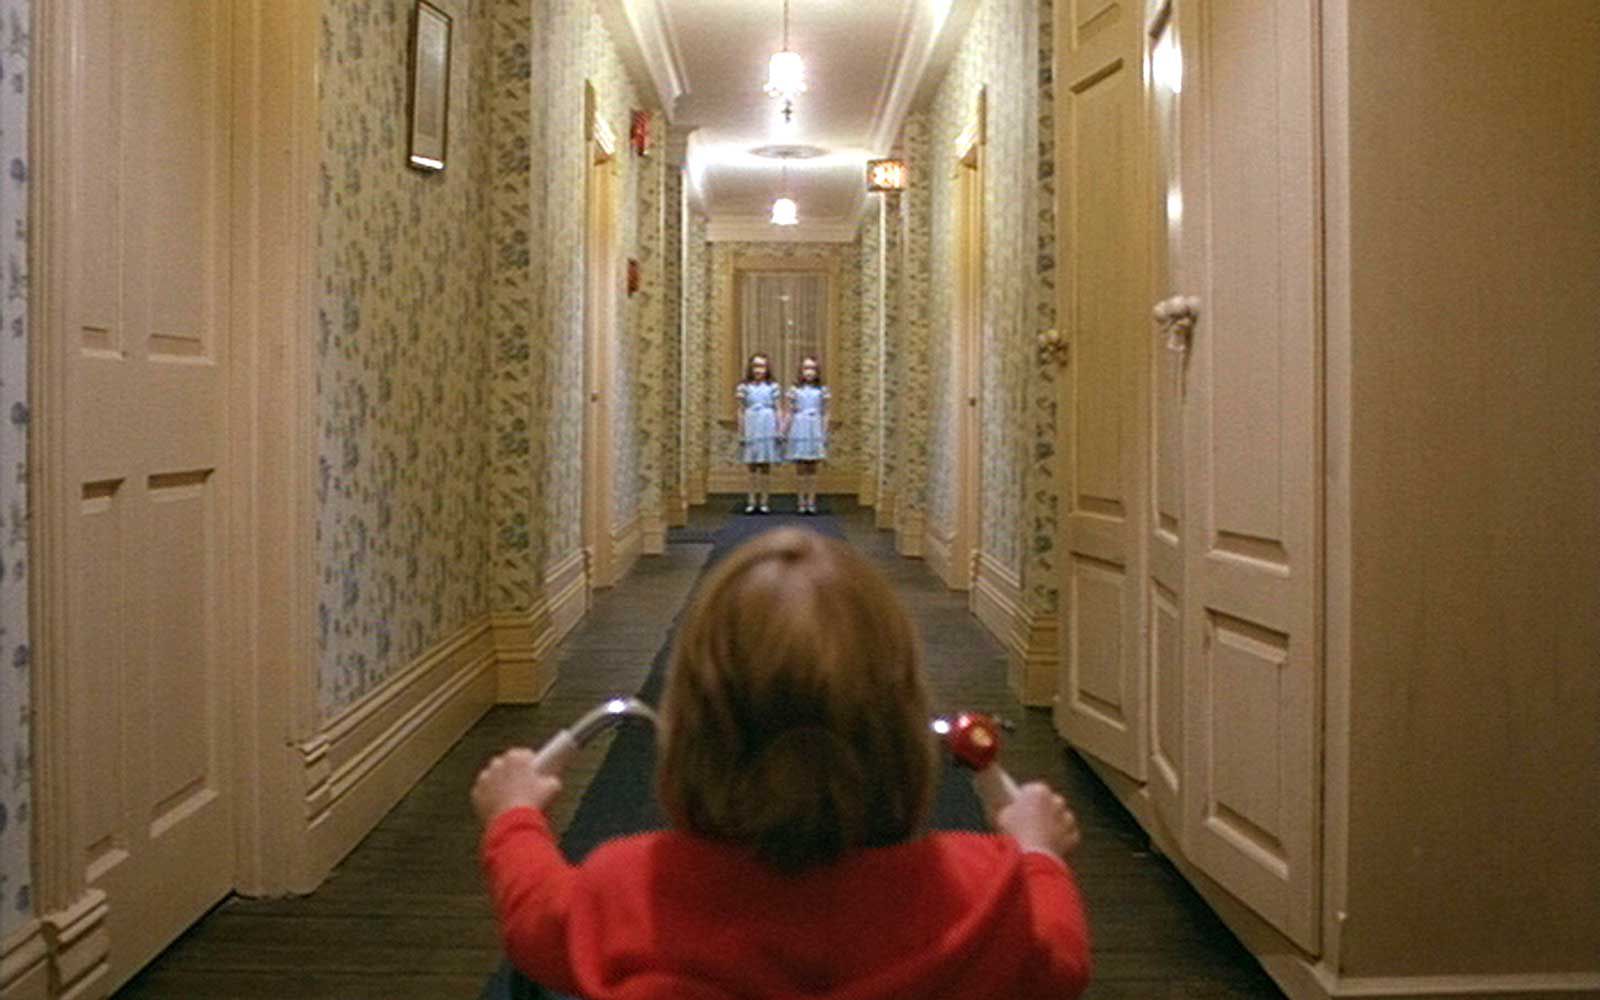 The secrets of Room 217 and Overlook Hotel